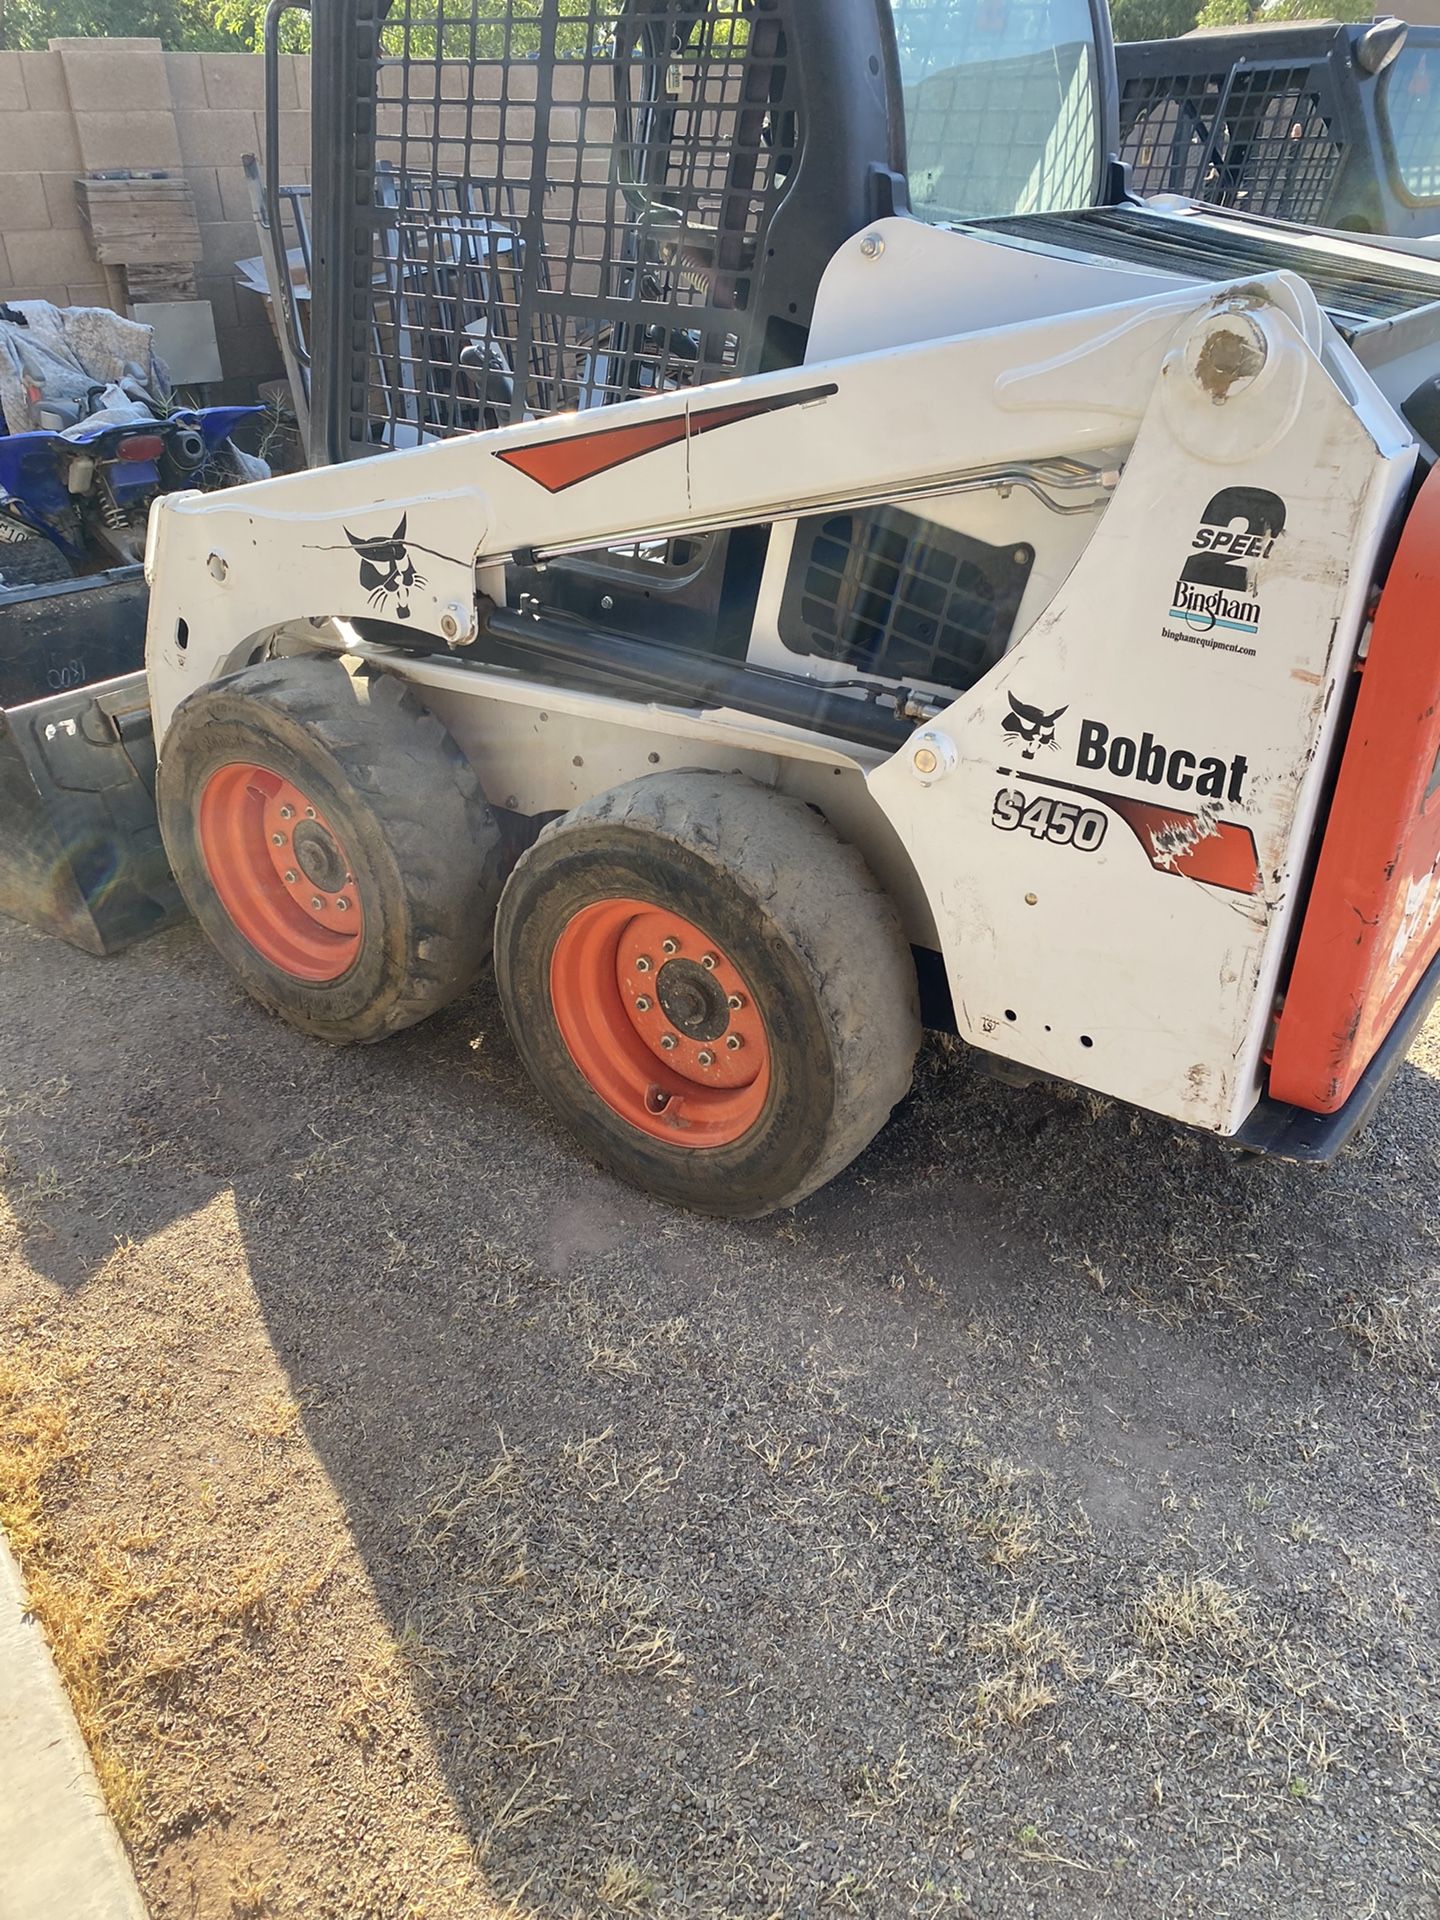 Bobcat S450 And S70 